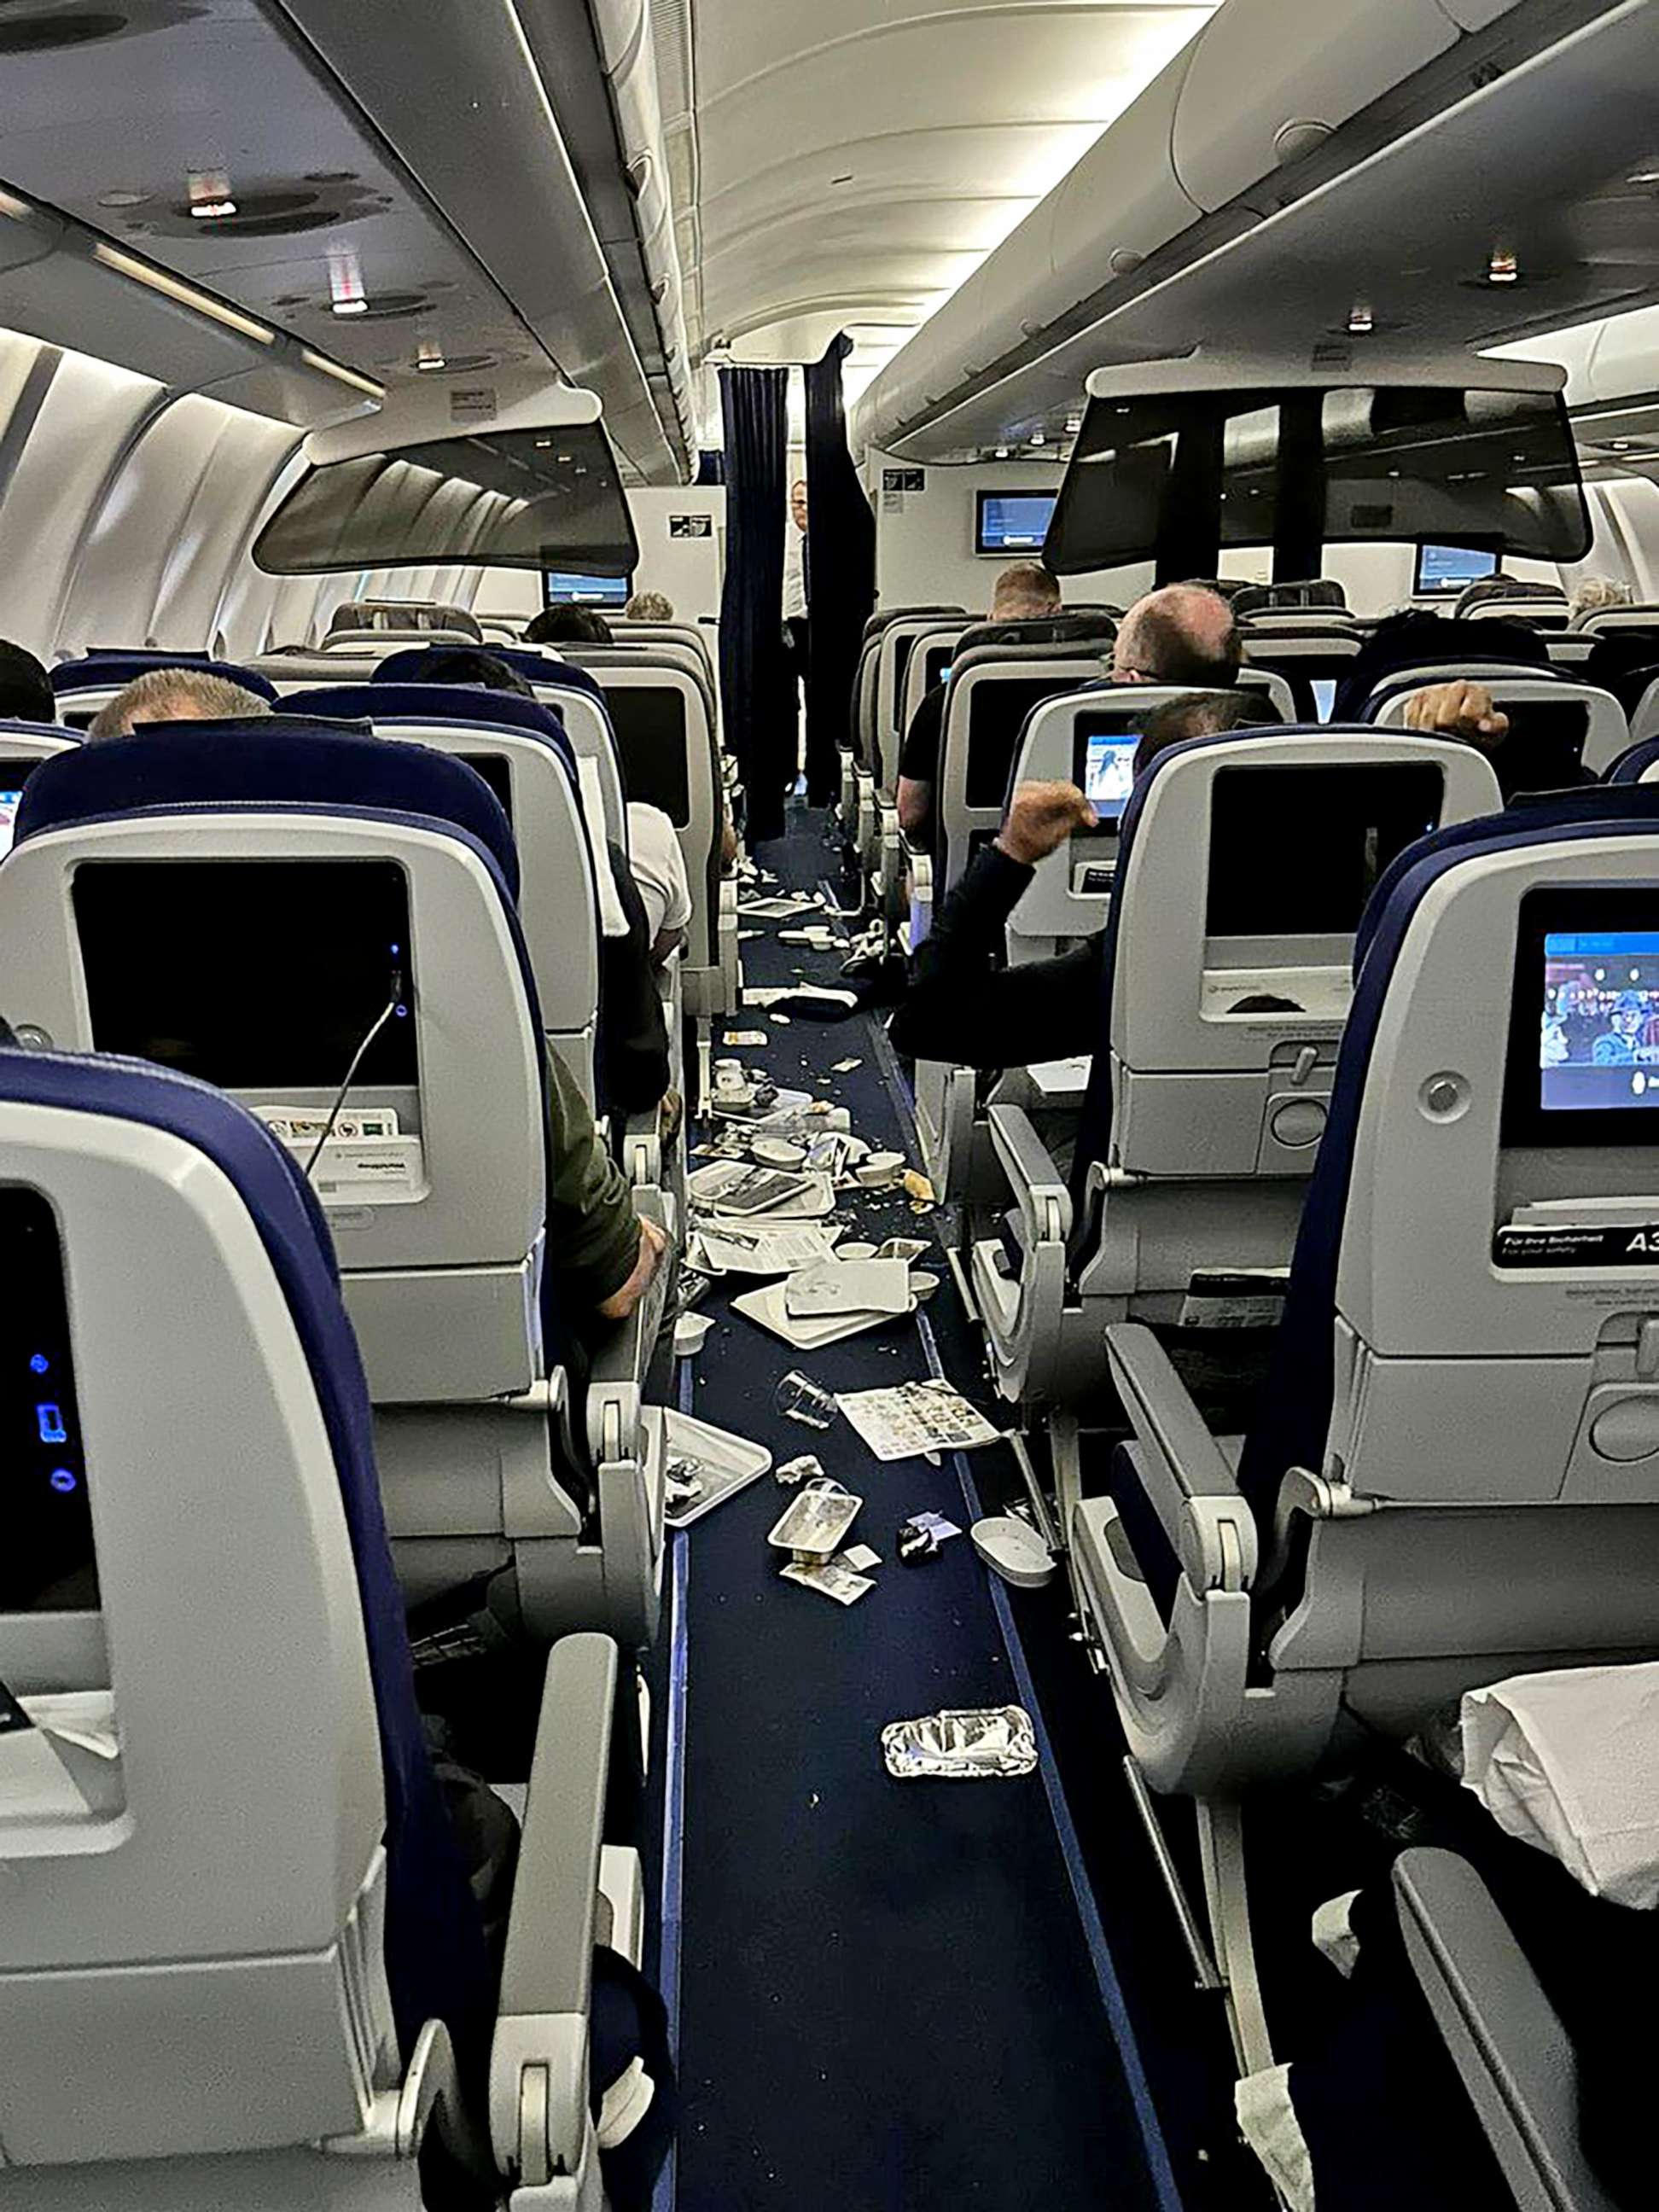 PHOTO: A photo shows inside the cabin of Lufthansa flight 469 as the turbulence sends seven to hospital.